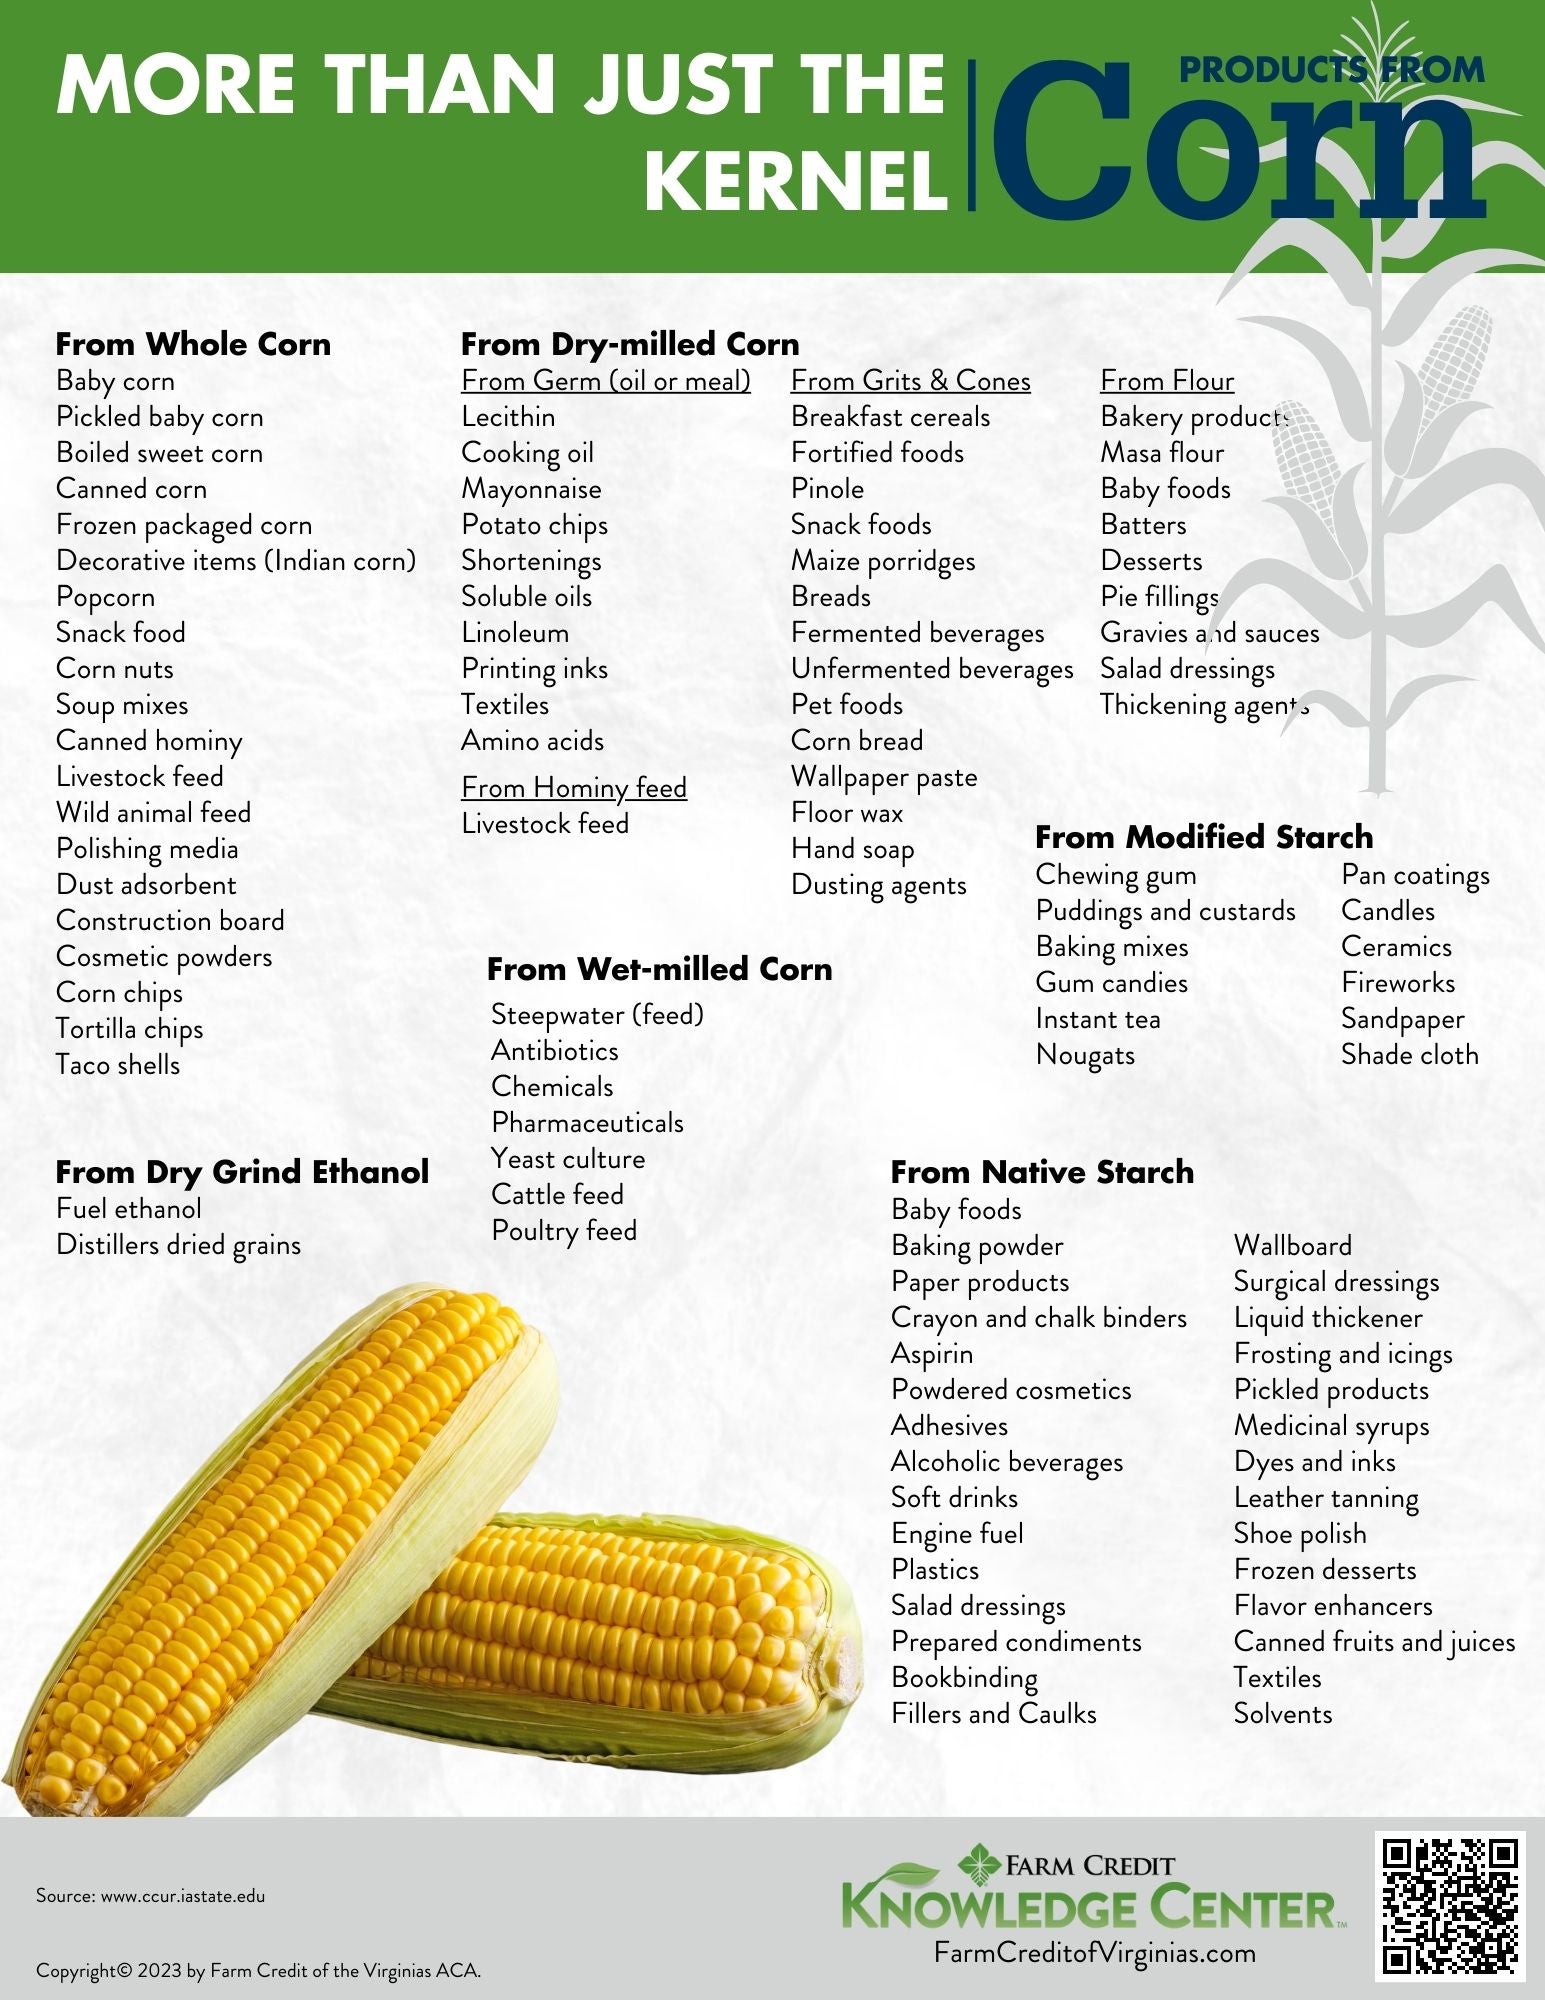 More than just the products from corn infographic